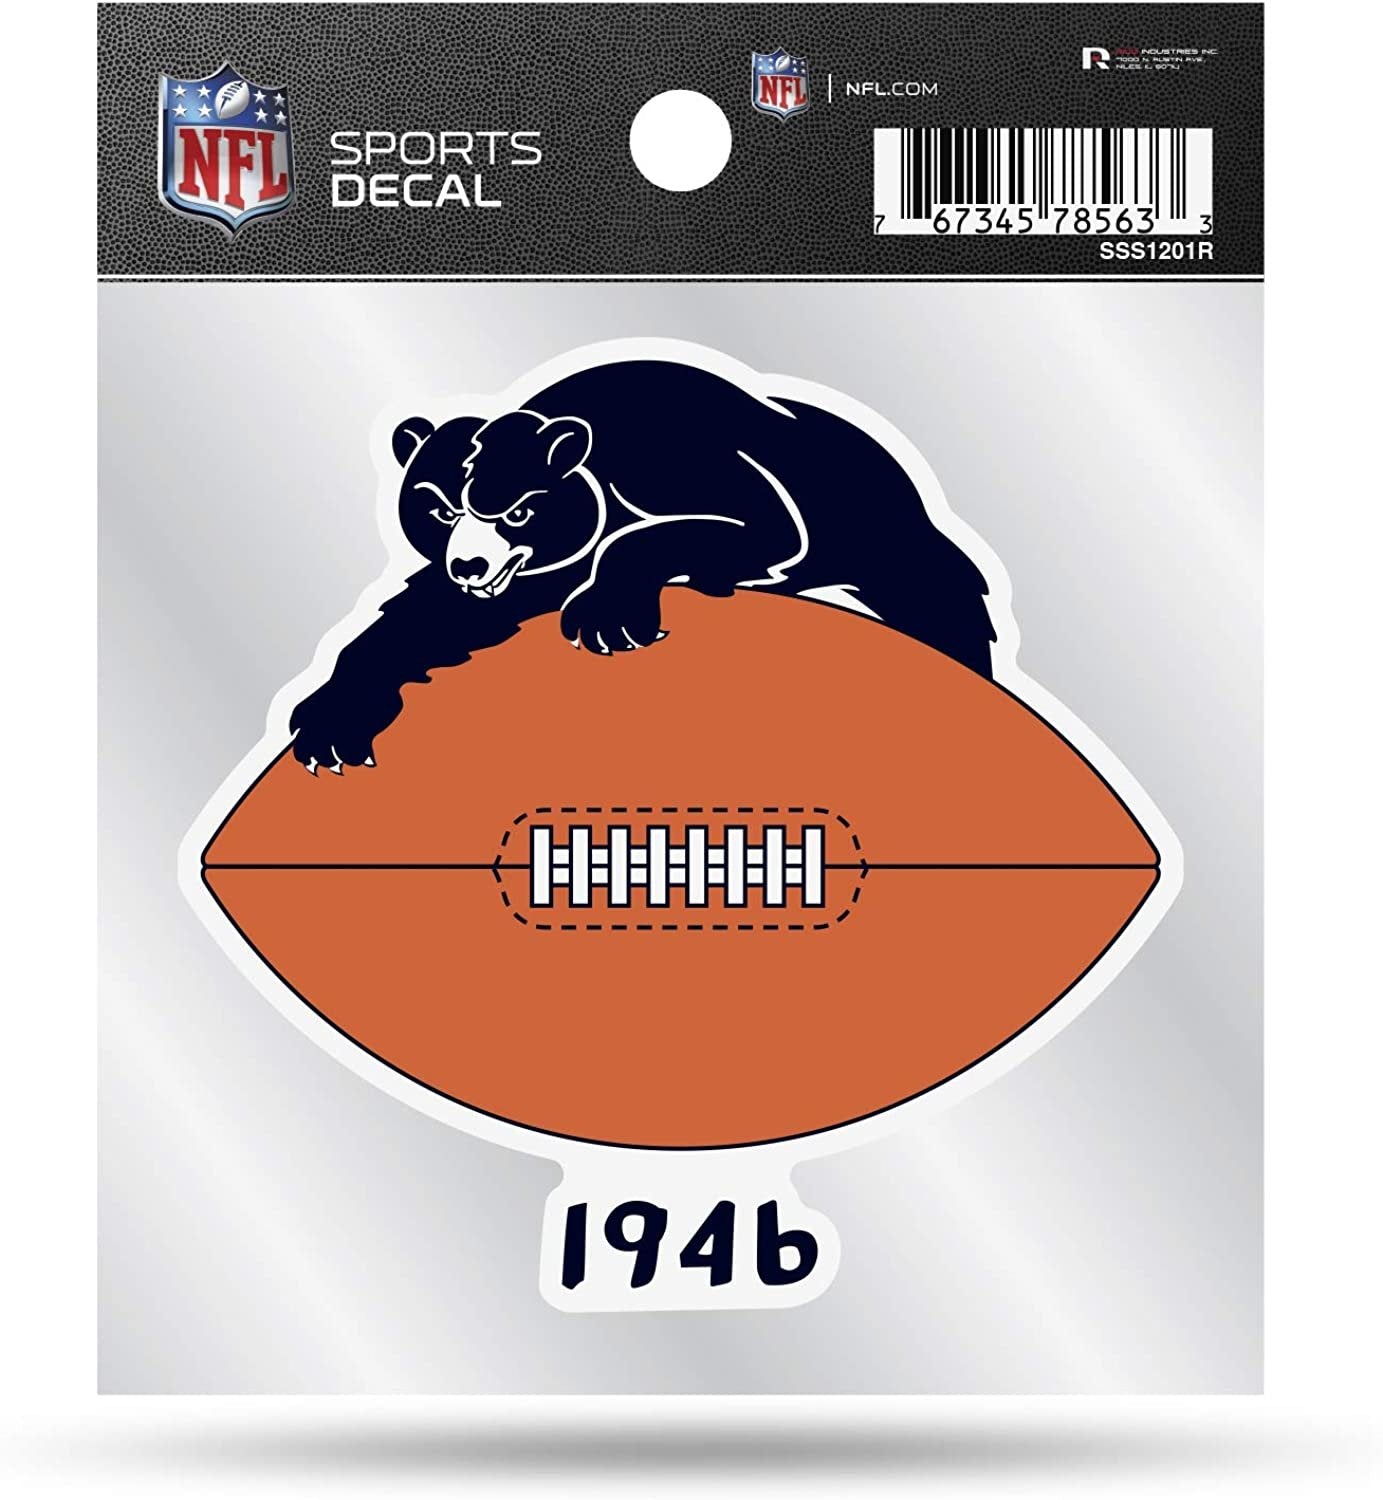 Chicago Bears 4x4 Inch Decal Sticker Retro Logo Design Clear Backing